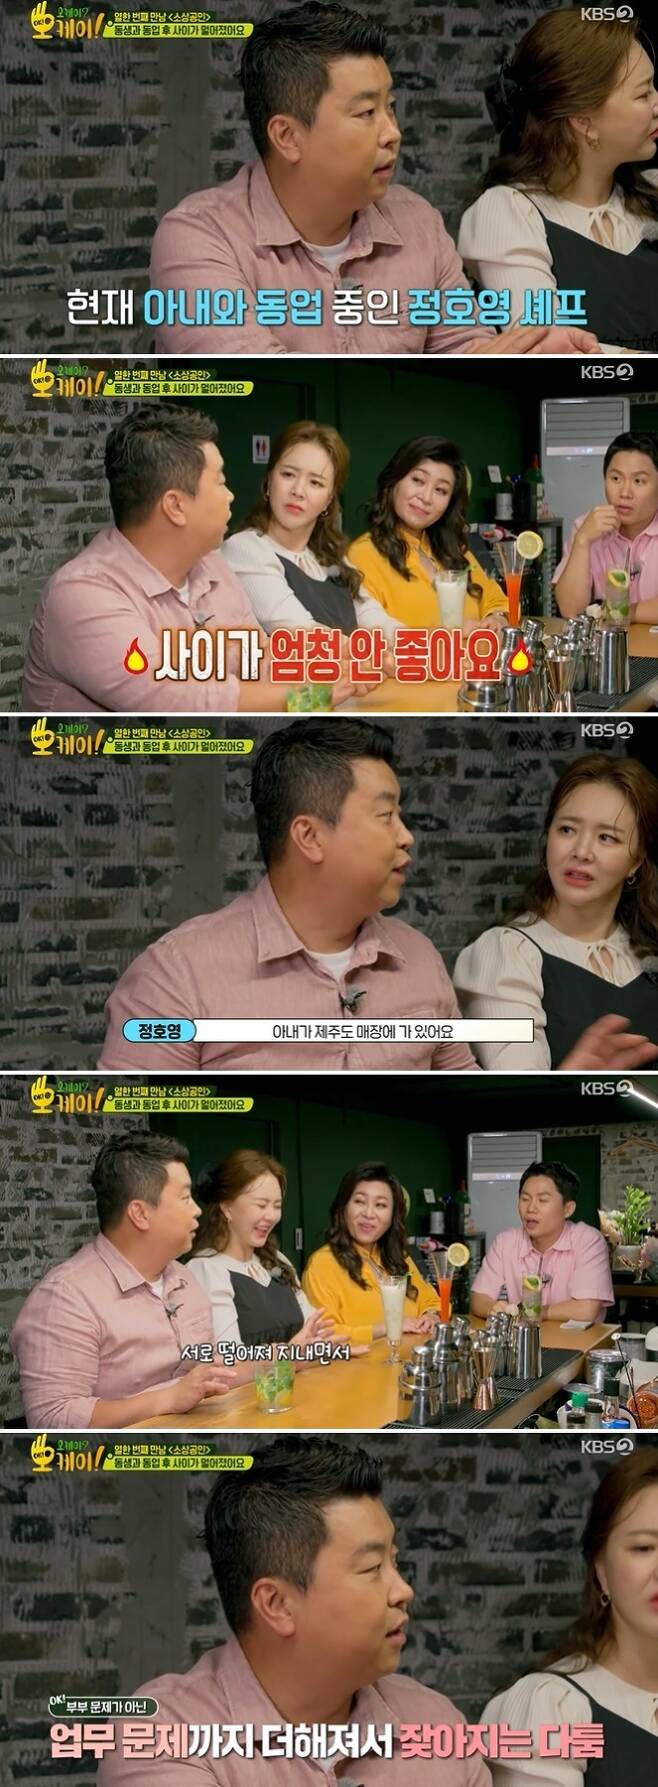 Jeong Ho-young Chef has been in a feud with his wife, Confessions said.On September 20th KBS 2TV Antioch, Jeong Ho-young Chef said, I am in business with my wife.When Yang Se-hyeong asked, Do you have any trouble working with your wife?, Jeong Ho-young Chef frankly said, The relationship has become very bad.Now my wife is at a Jeju Island store, he said. I fell a lot and got better.